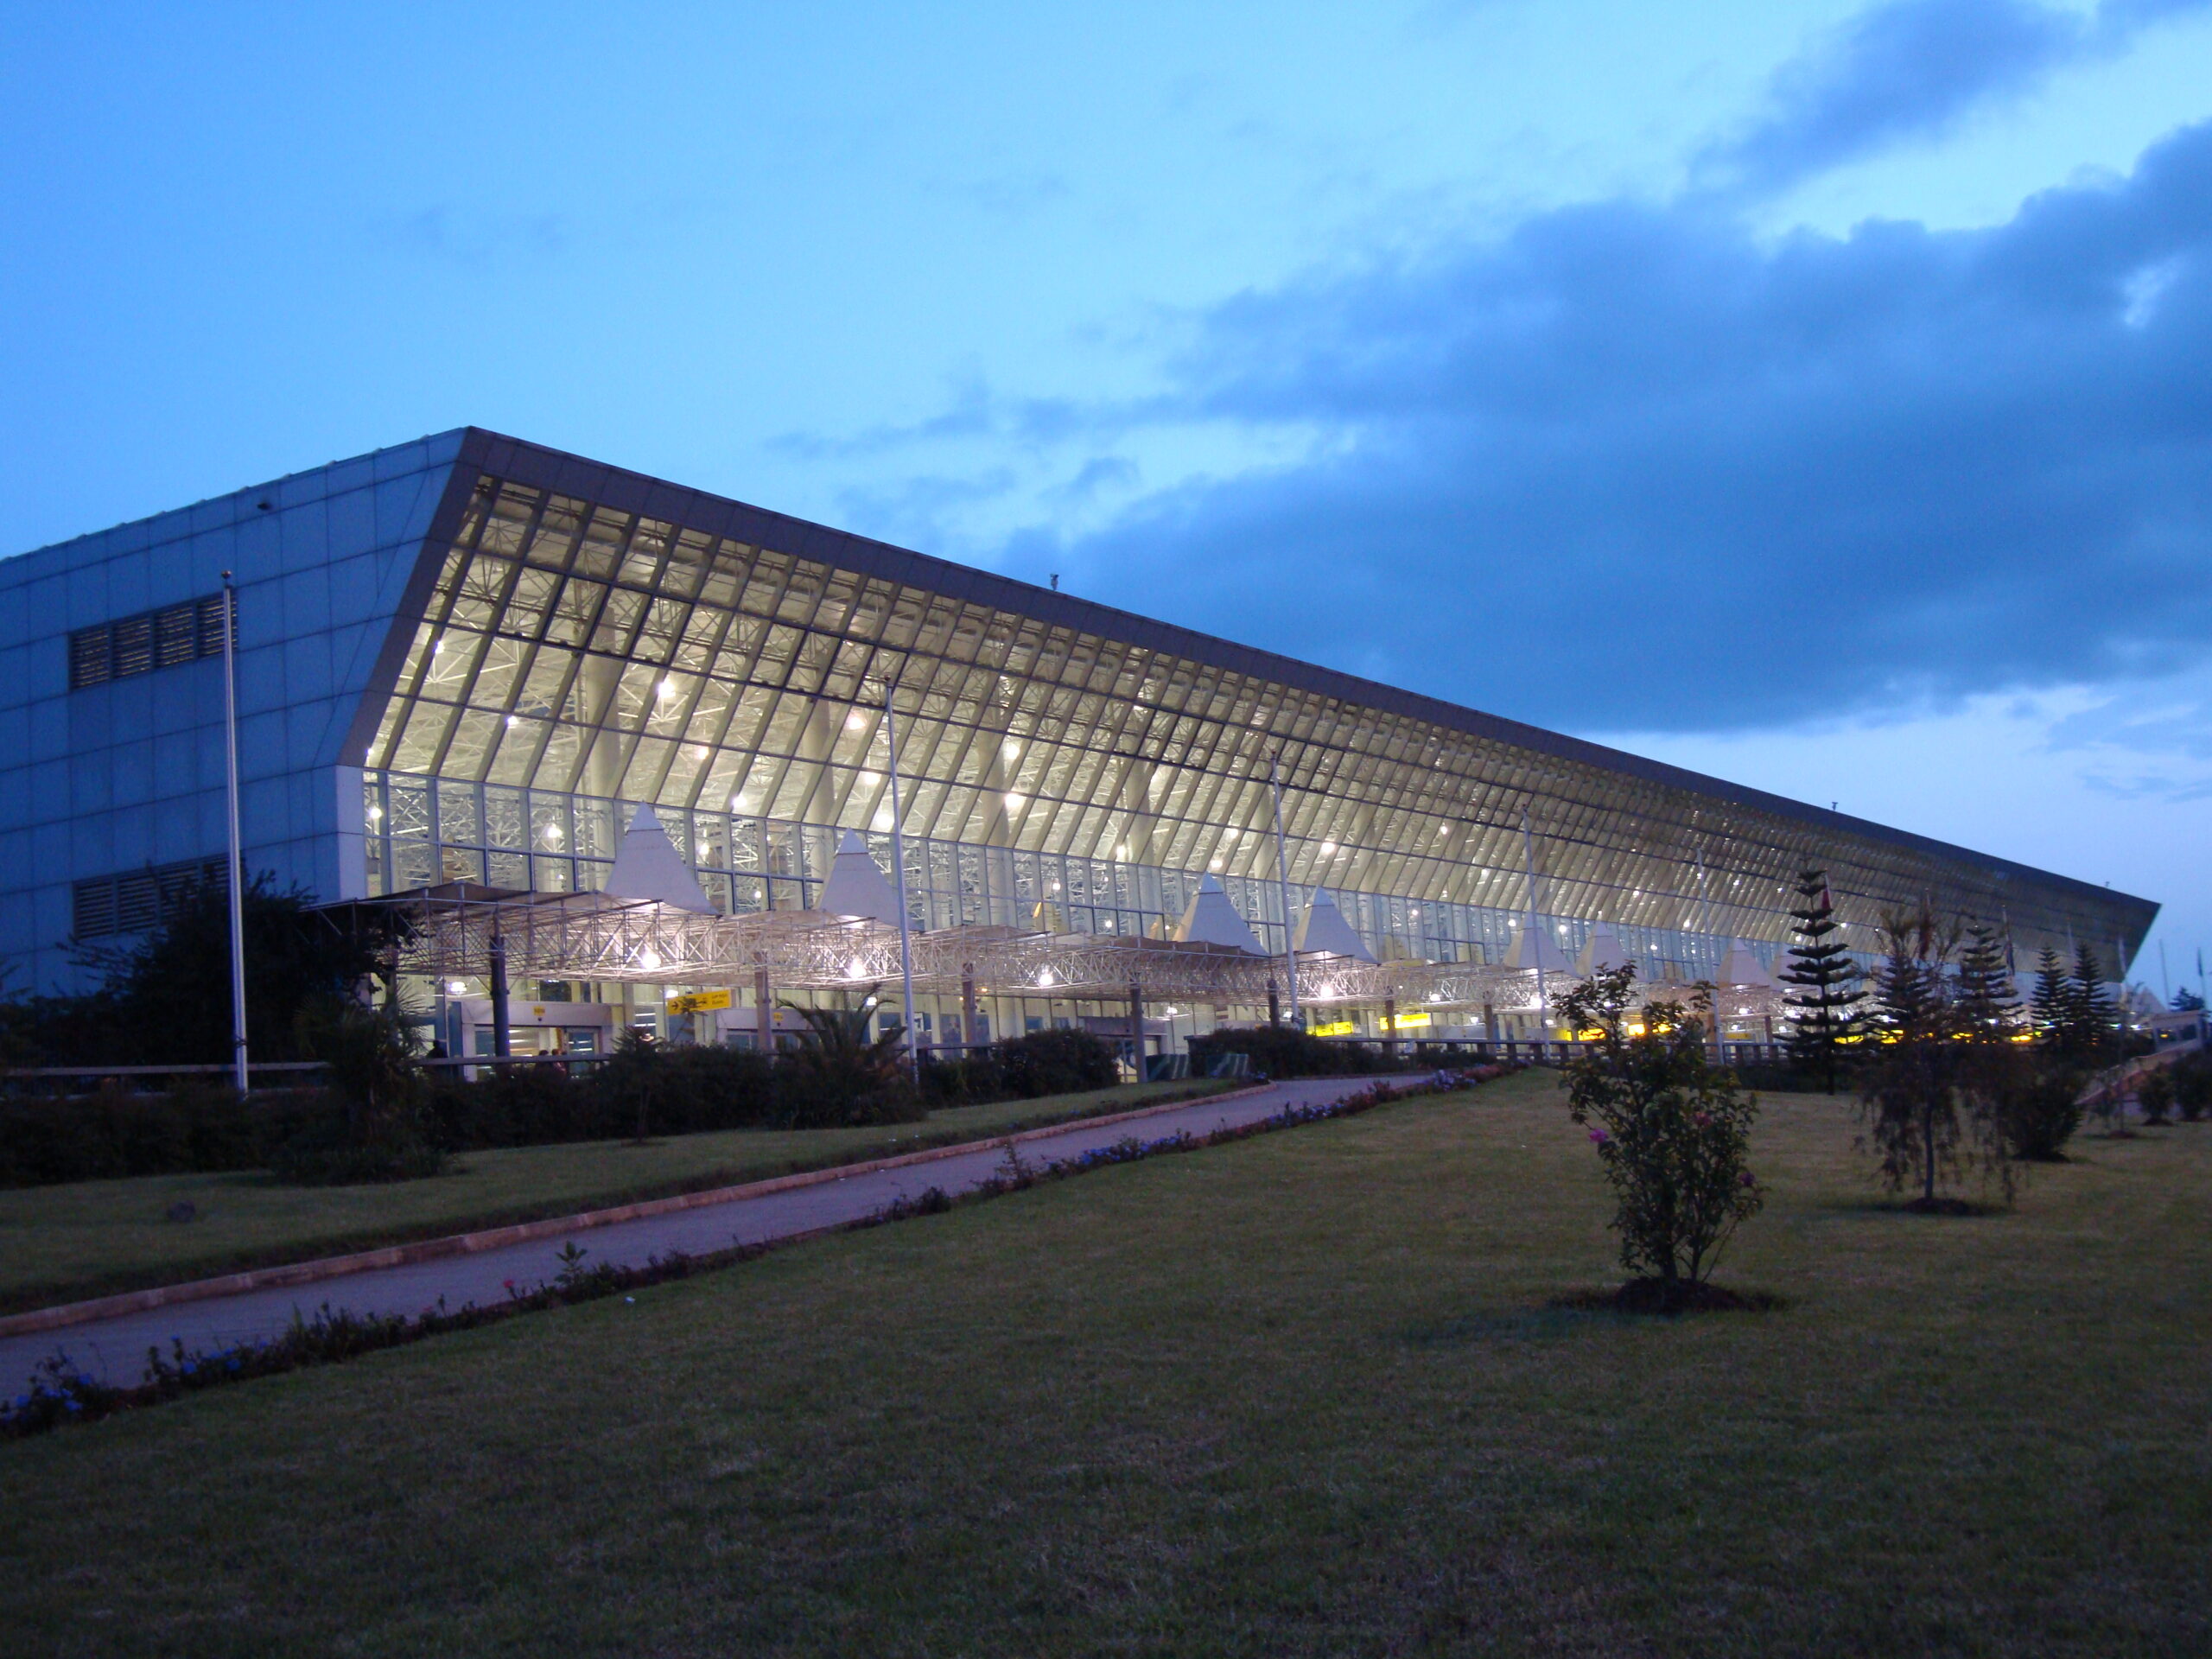 Ethiopia: Bole Airport Set For Expansion as Passenger Traffic Expected to Triple